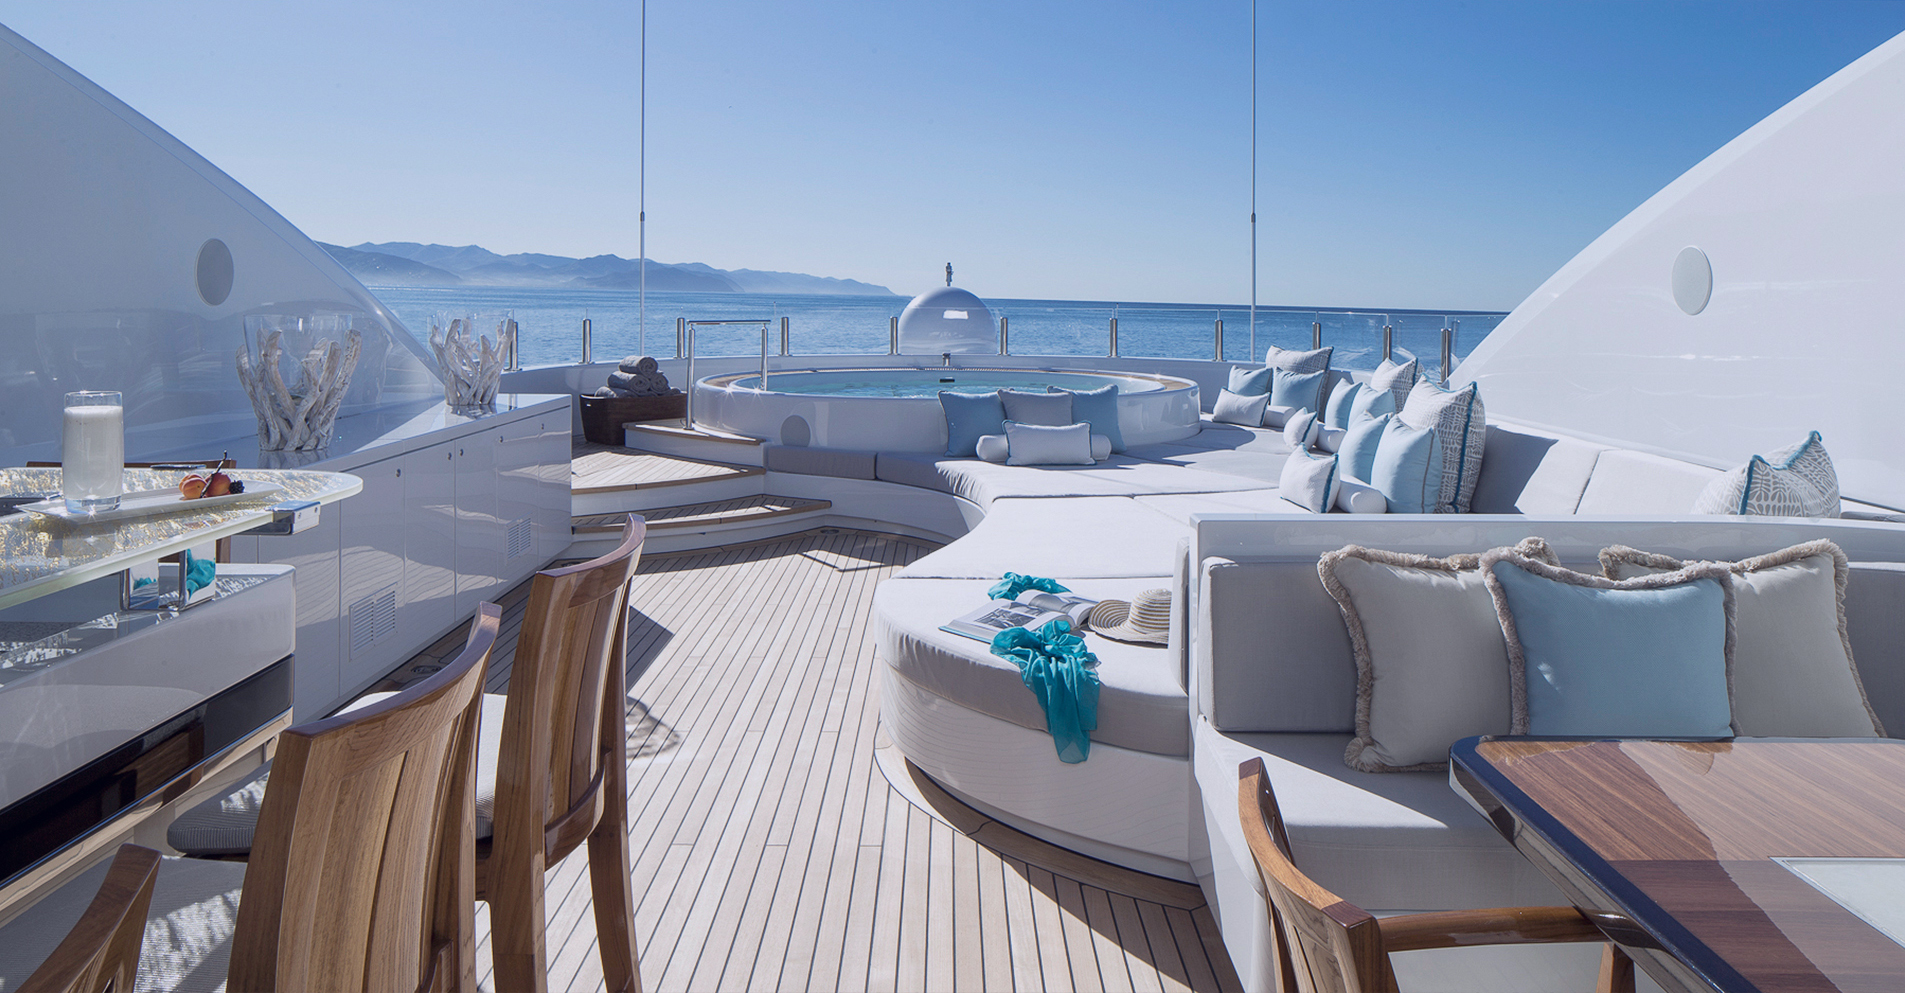 Turquoise Yacht Refit | Turquoise Boat Refit | Amico & Co